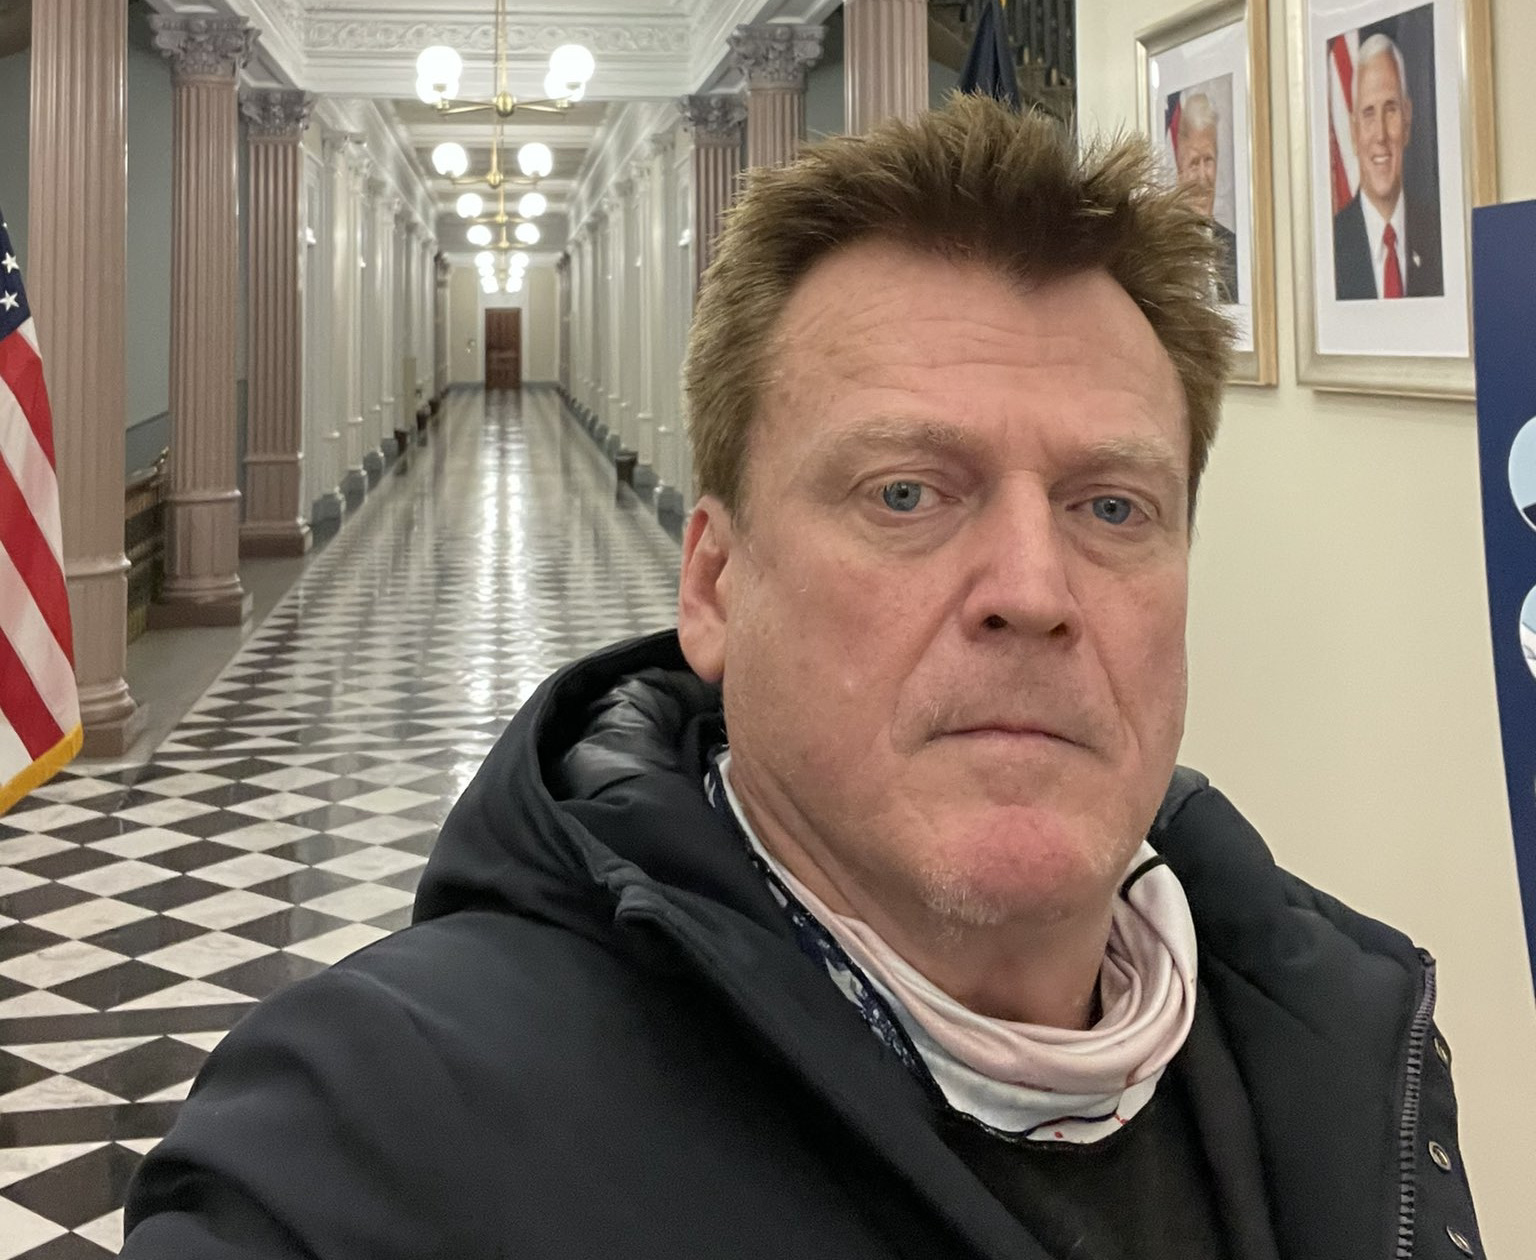 Bizarre new details emerge about how Patrick Byrne, former Overstock.com  CEO, bluffed his way into the White House to press Donald Trump to keep  fighting the election result.